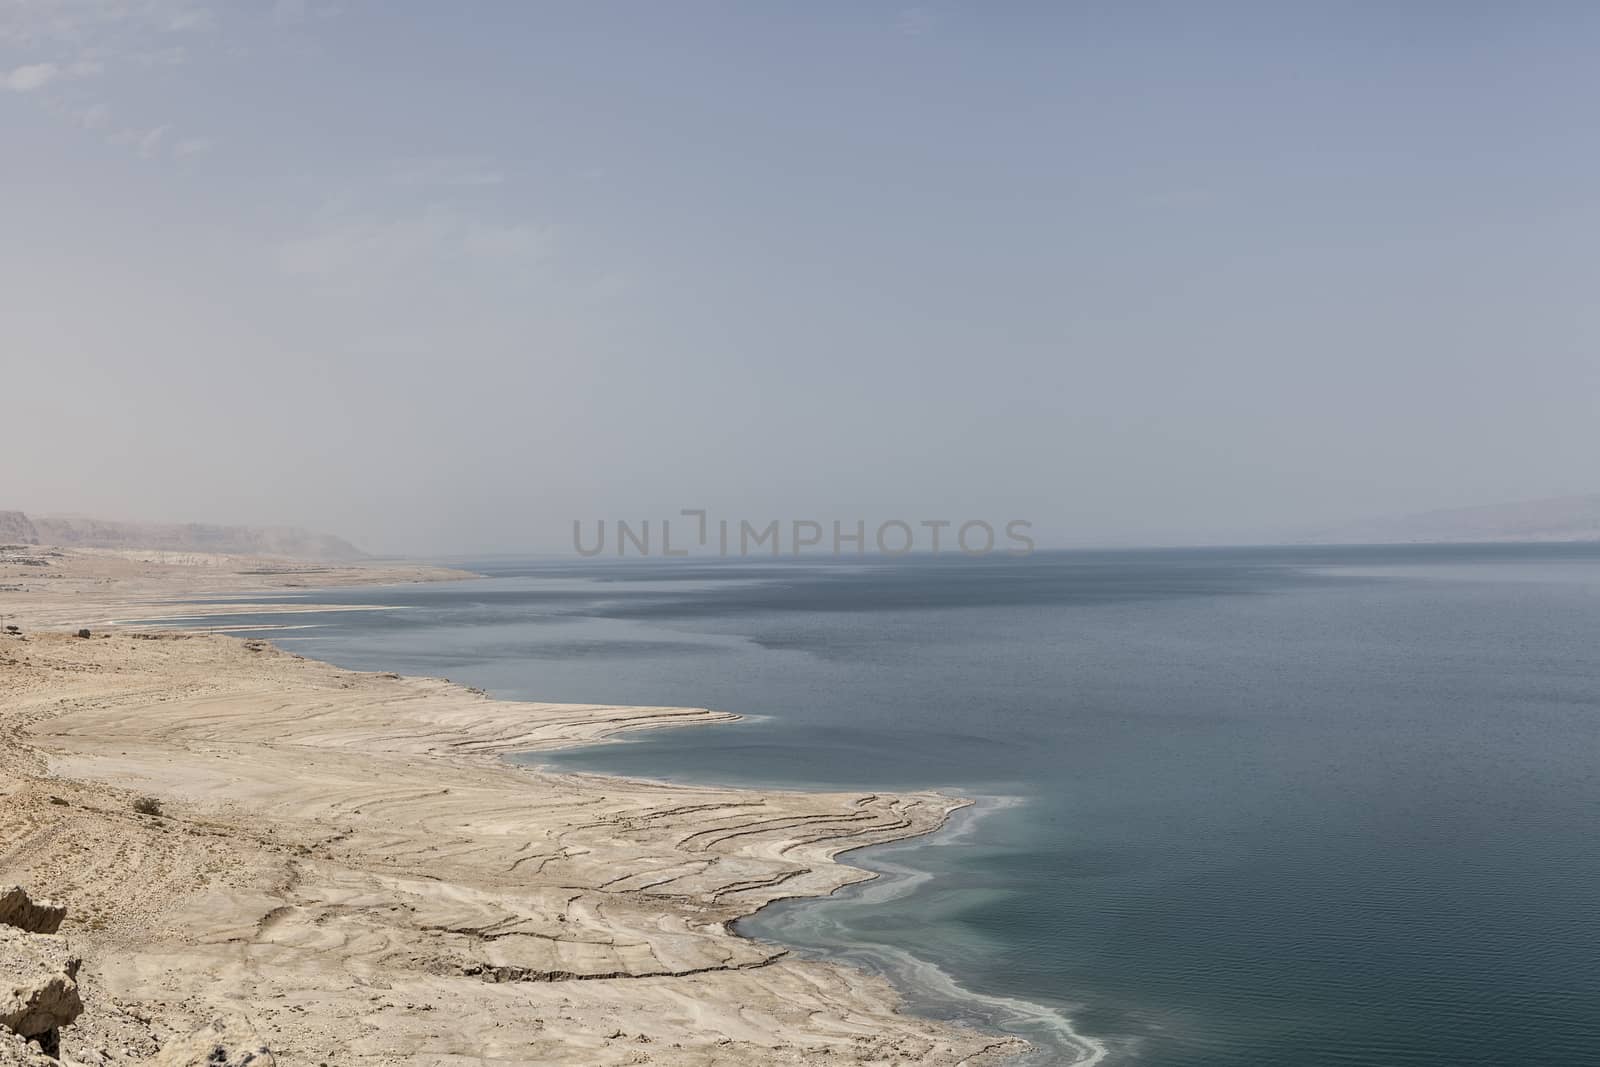 A beautiful view of the Dead Sea